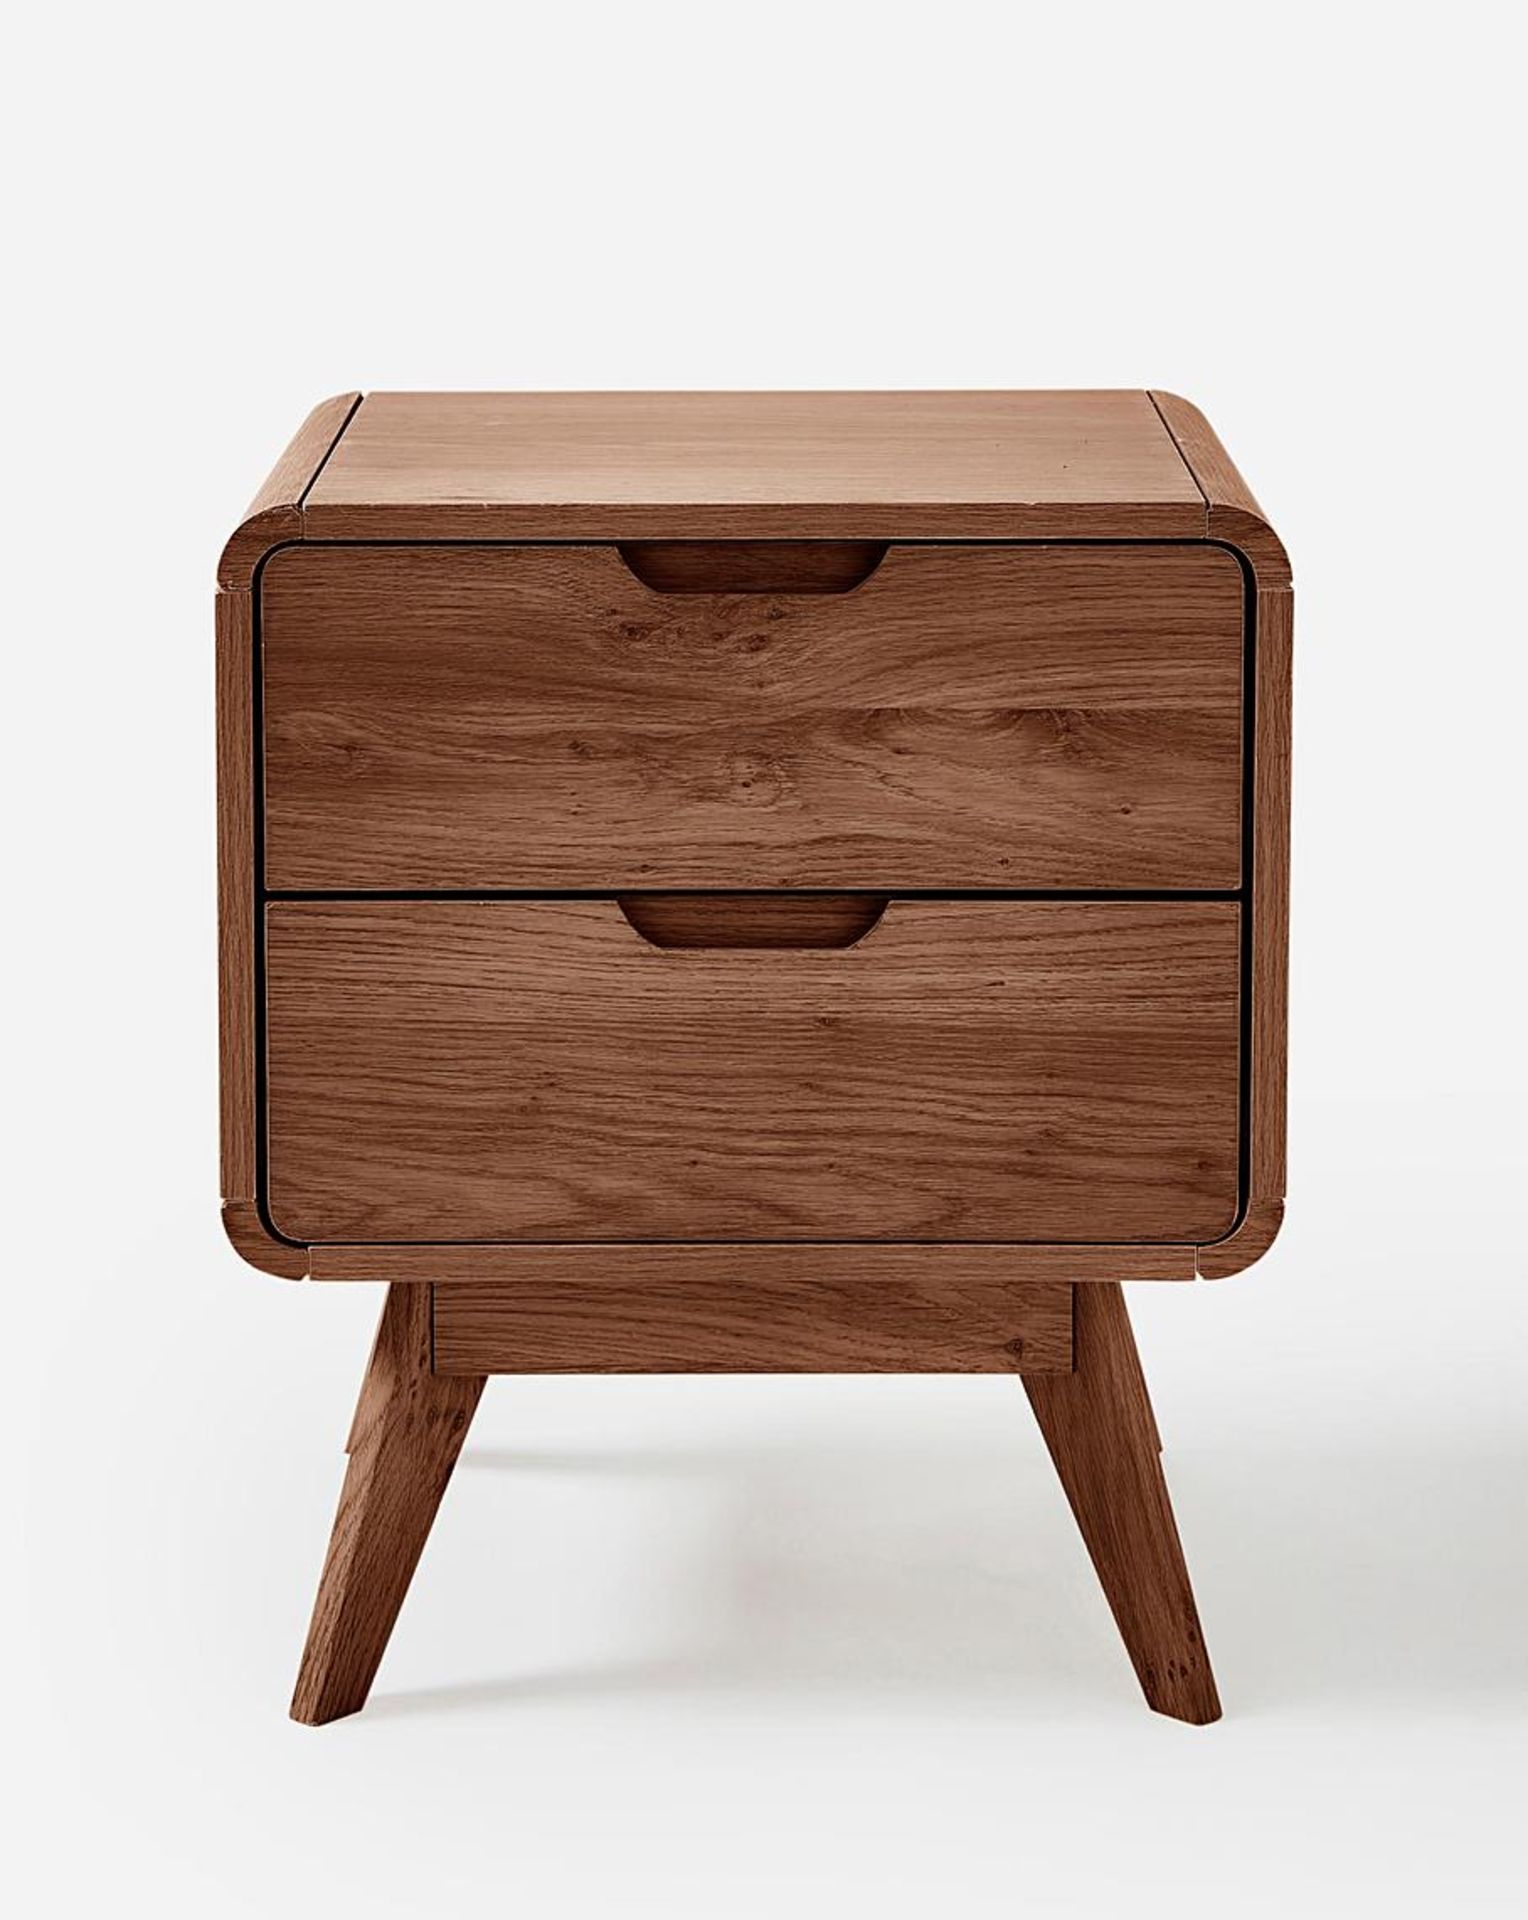 Oslo 2 Drawer Bedside Table. RRP £133.00. With its beautifully curved retro edges and handleless